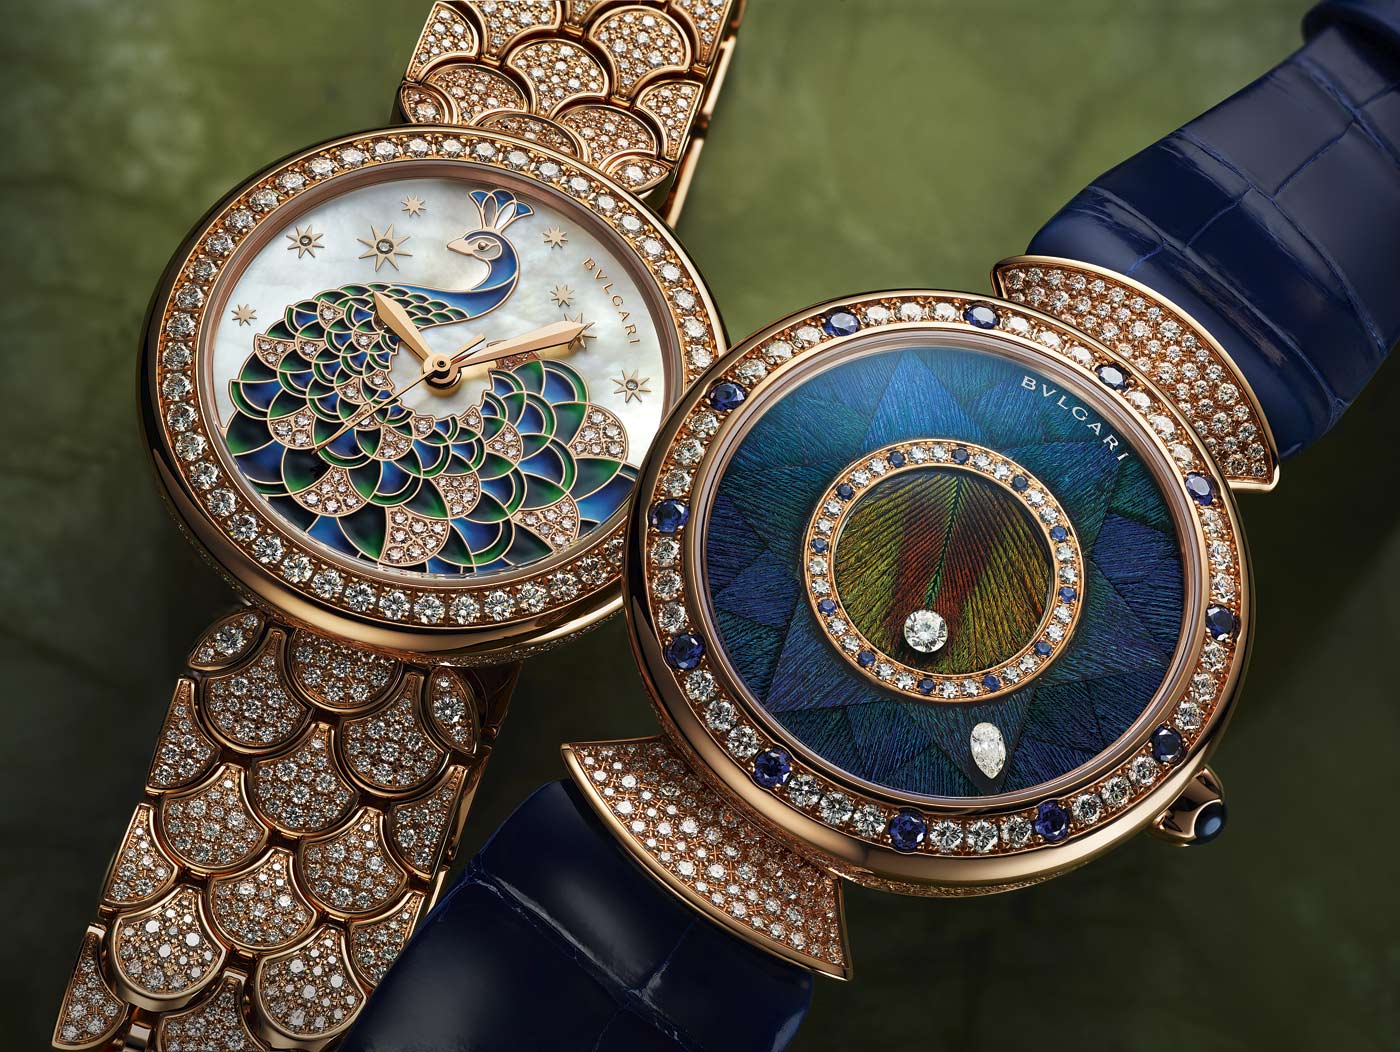 Sophie's Choice: The Top Five Timepieces From LVMH Watch Week